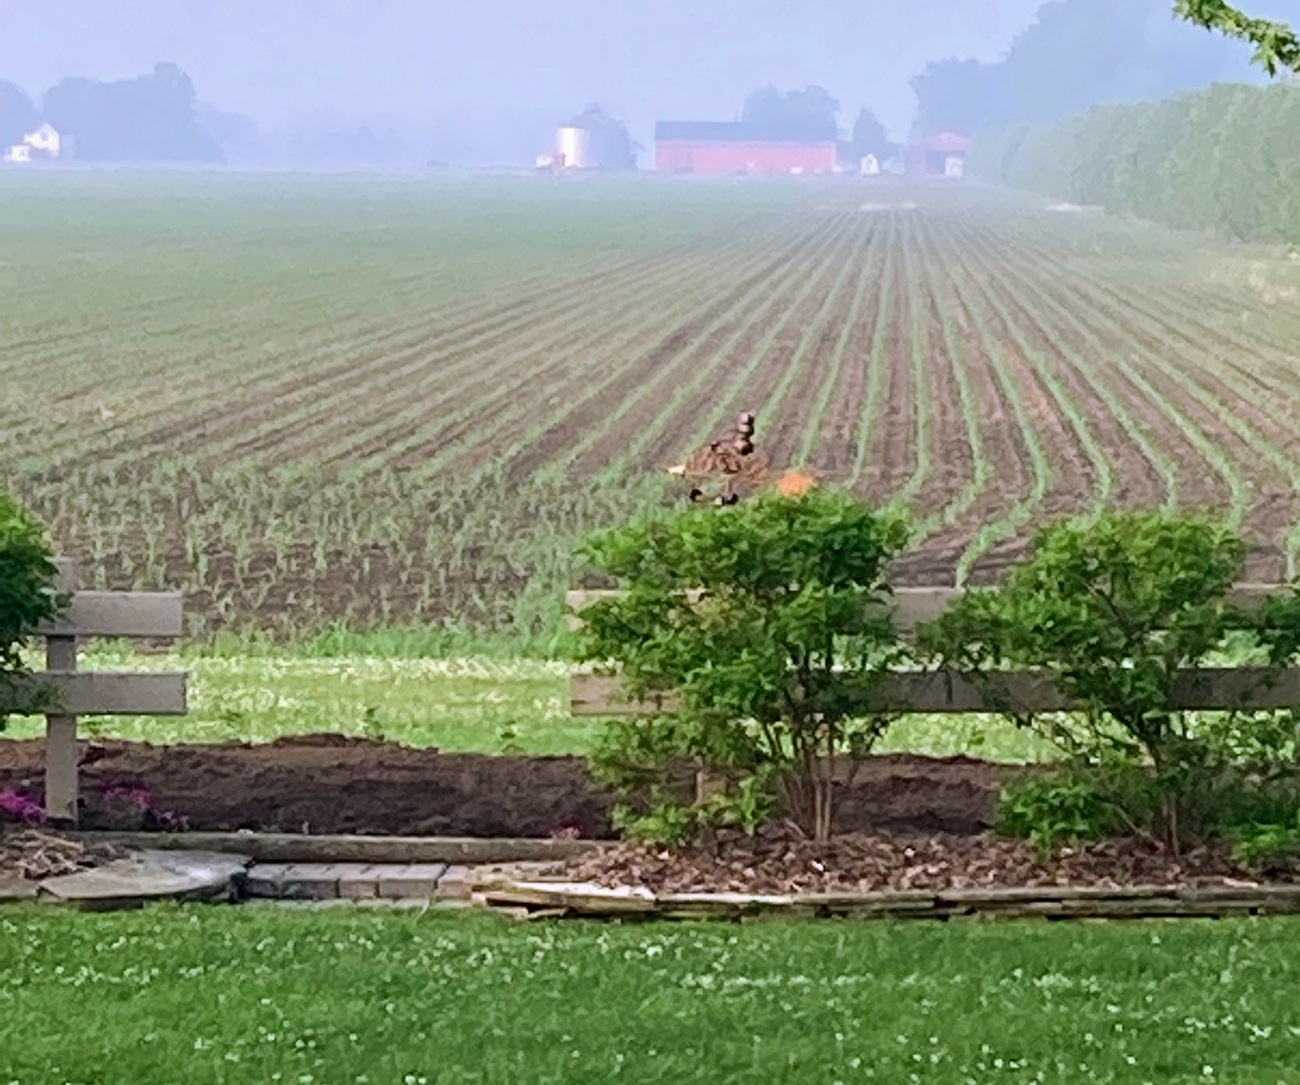 An early look (June 17 2022) at no-till soy planted into corn stalks, planted in 20" rows moving over 10" to plant soybeans.  Benefits include erosion protection, moisture conservation, soil cooling and improved soil health and nutrient cycling